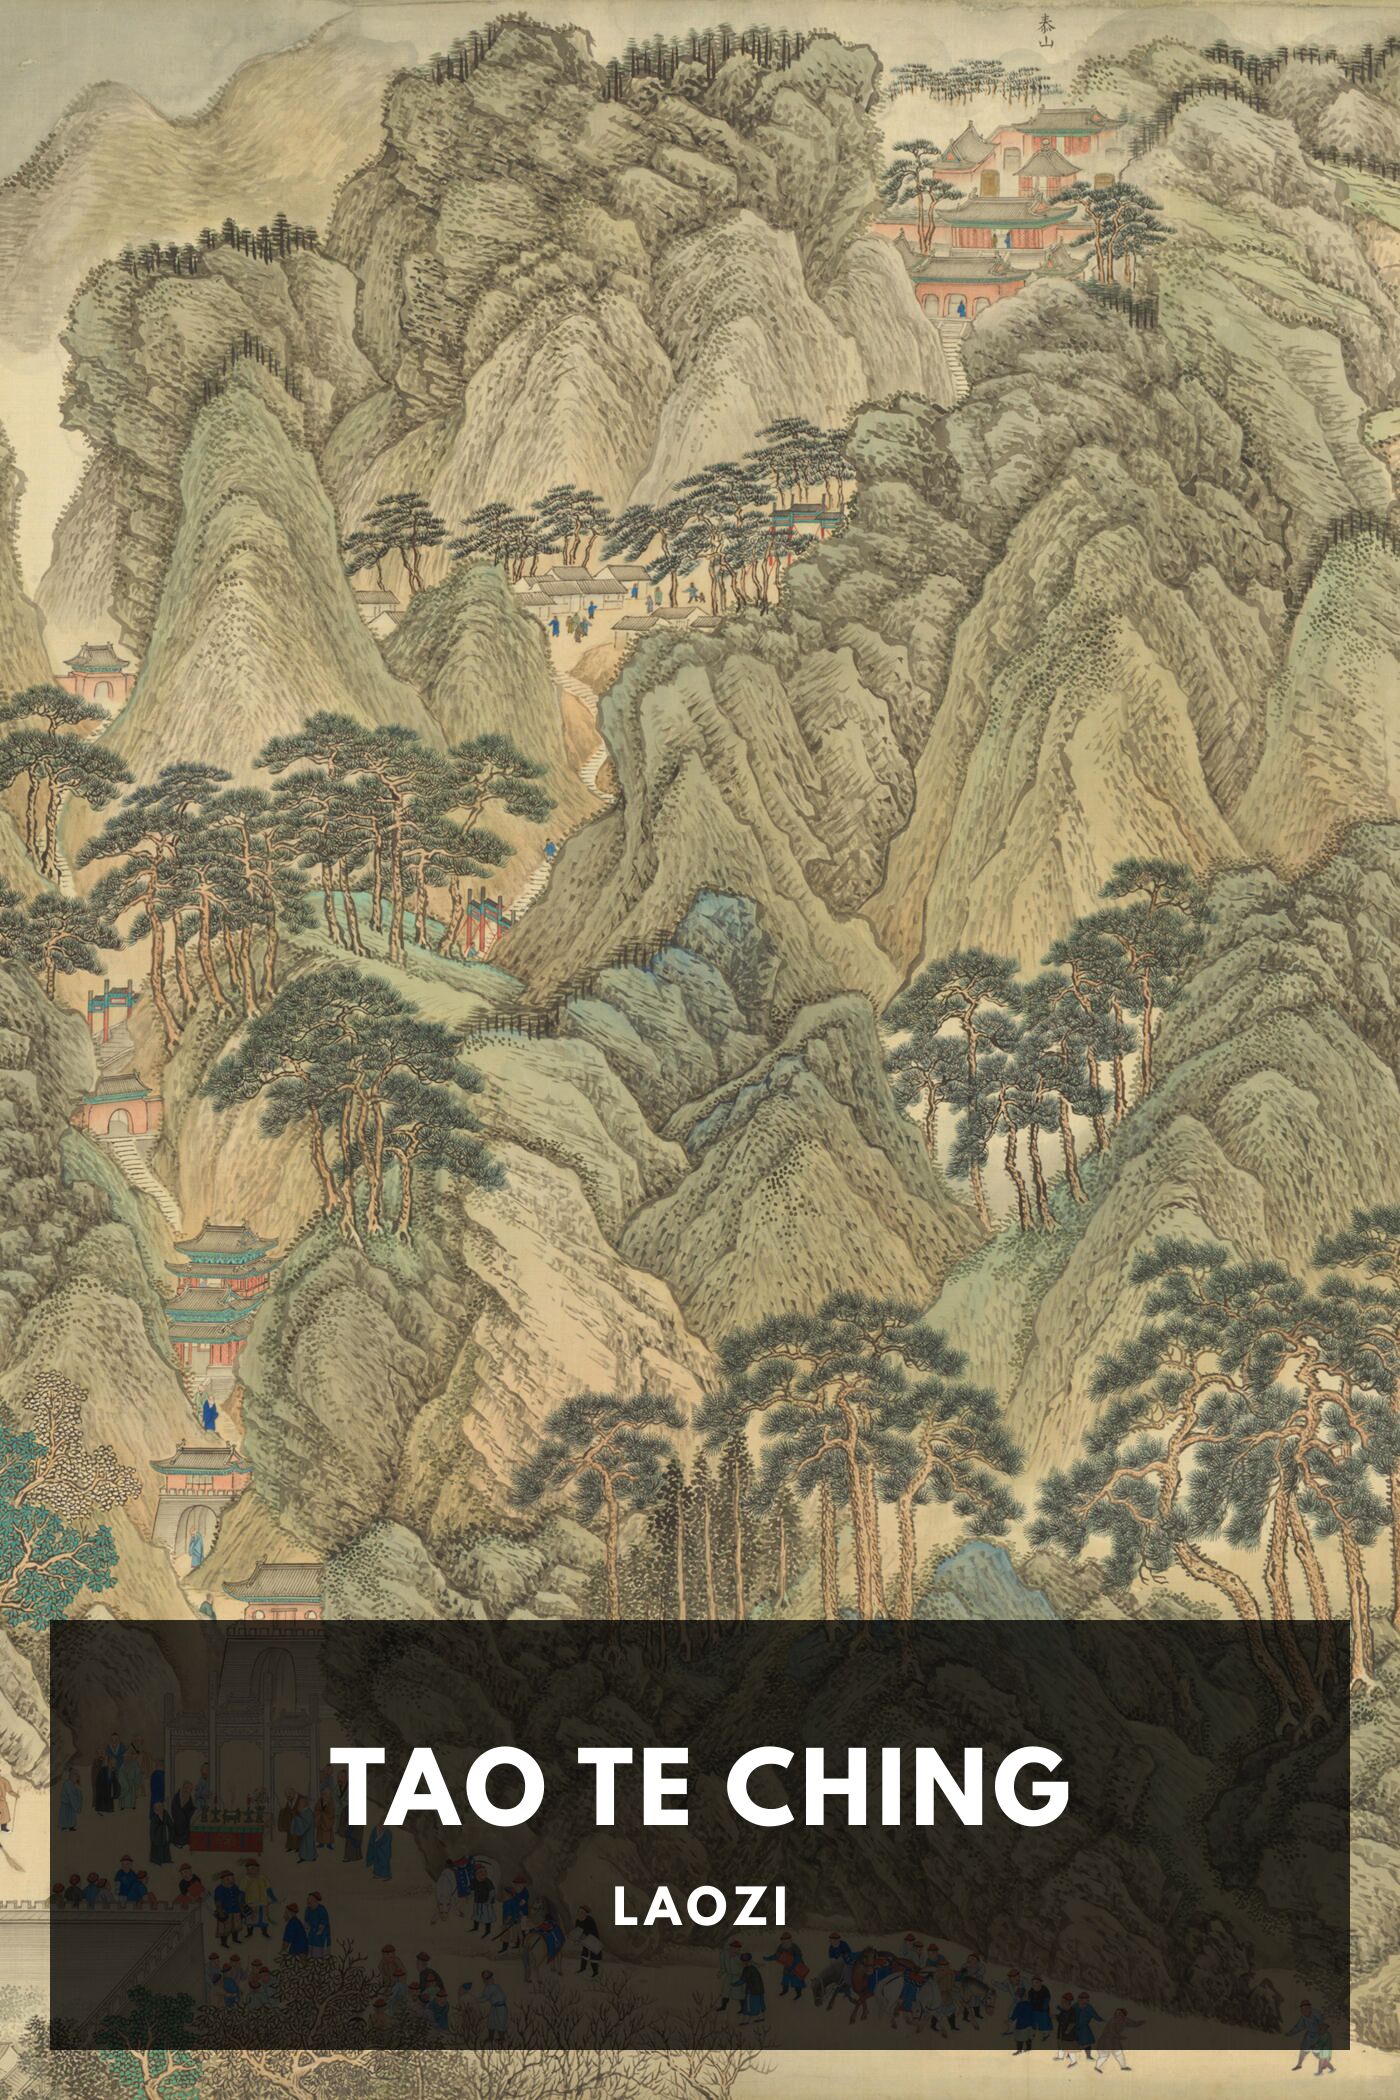 Tao Te Ching, by Laozi. Translated by James Legge - Free ebook download -  Standard Ebooks: Free and liberated ebooks, carefully produced for the true  book lover.